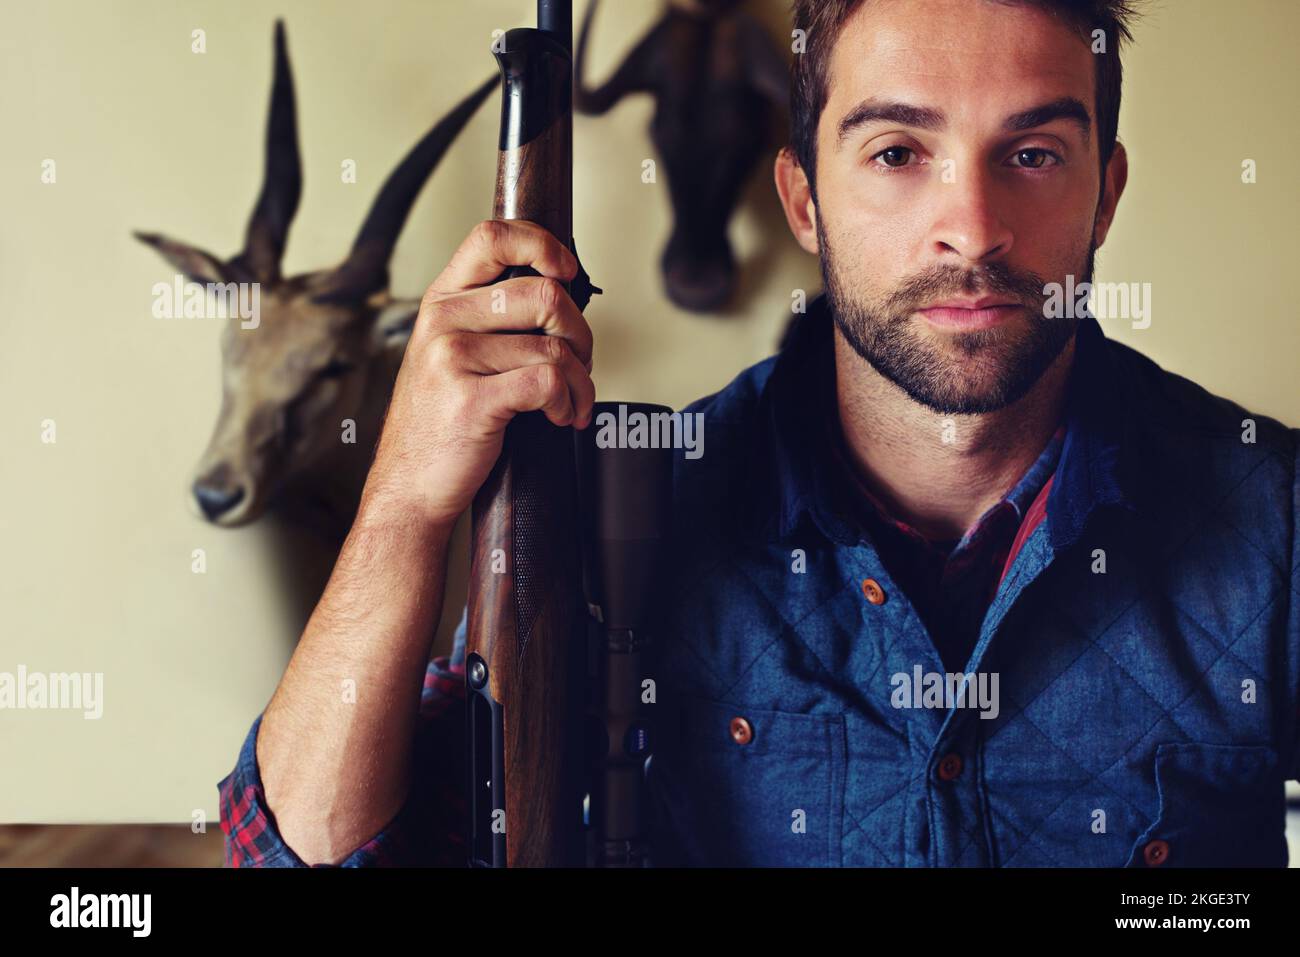 Life of a hunter. Portrait of a hunter standing in front of his trophies. Stock Photo